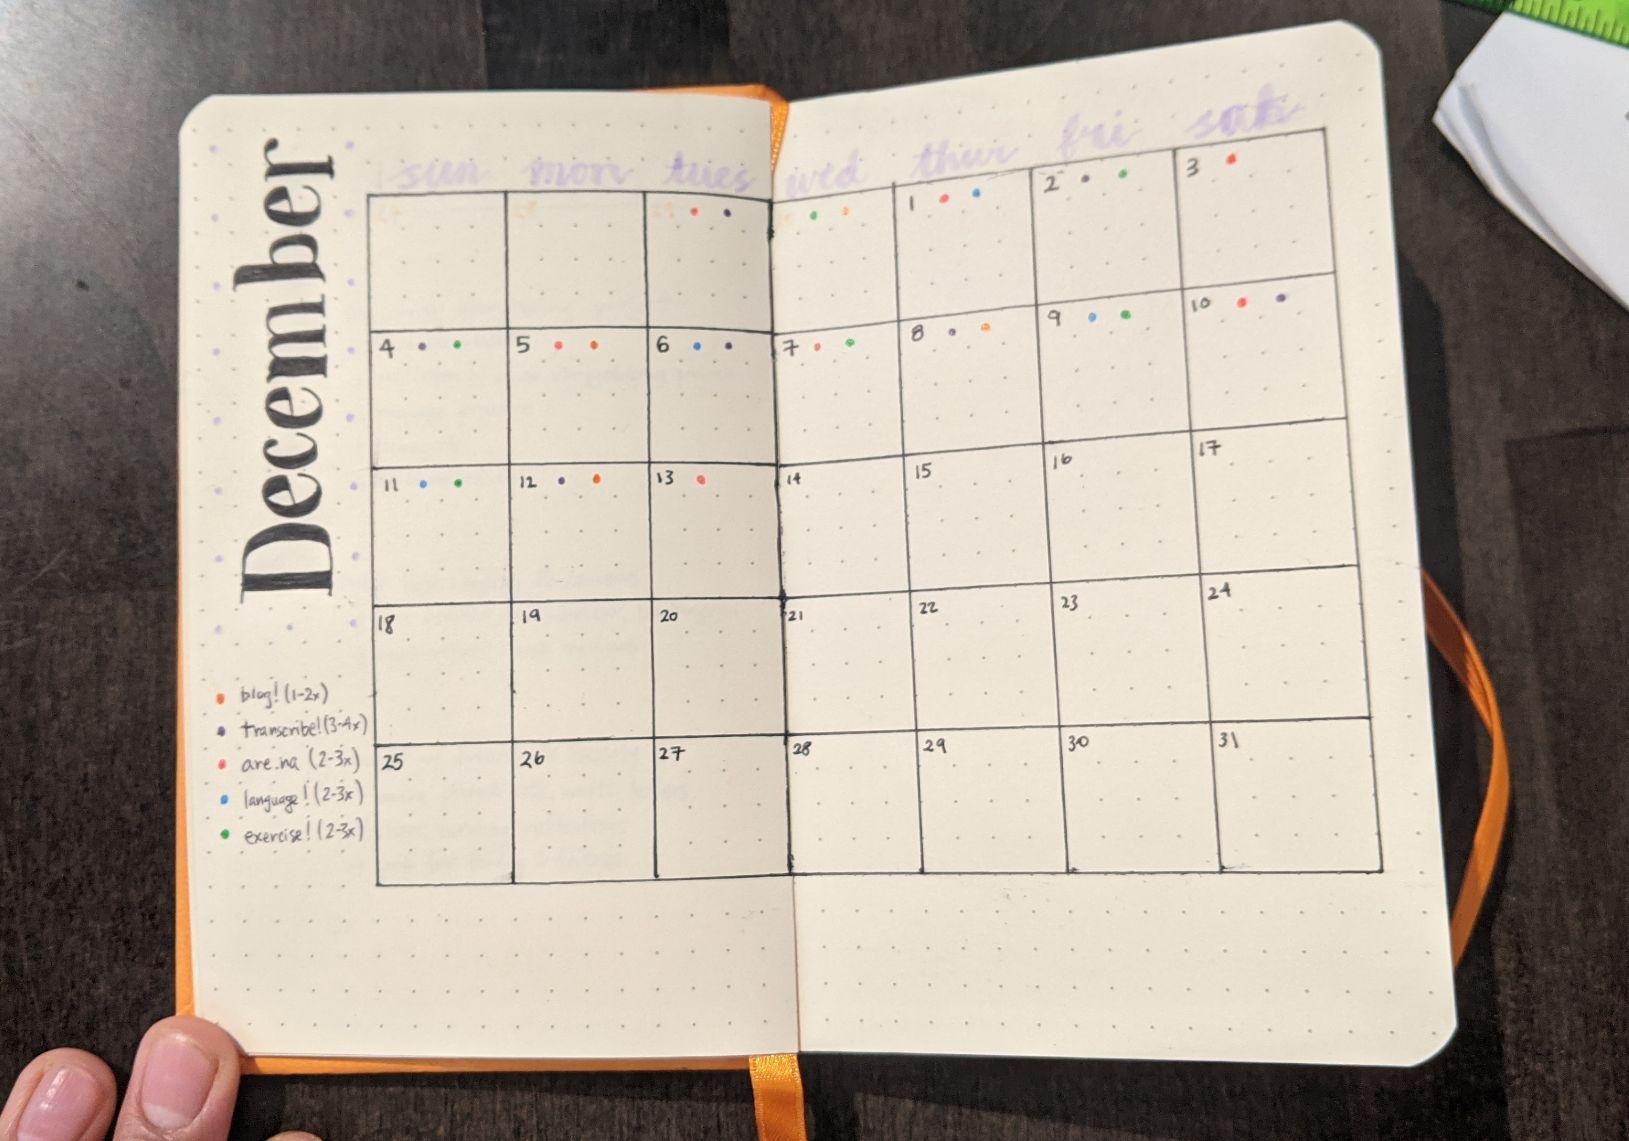 A picture of a calendar of the month of December 2022 drawn in a dot notebook. There are different colored dots on each day and a key signifying which habit corresponds to which color.